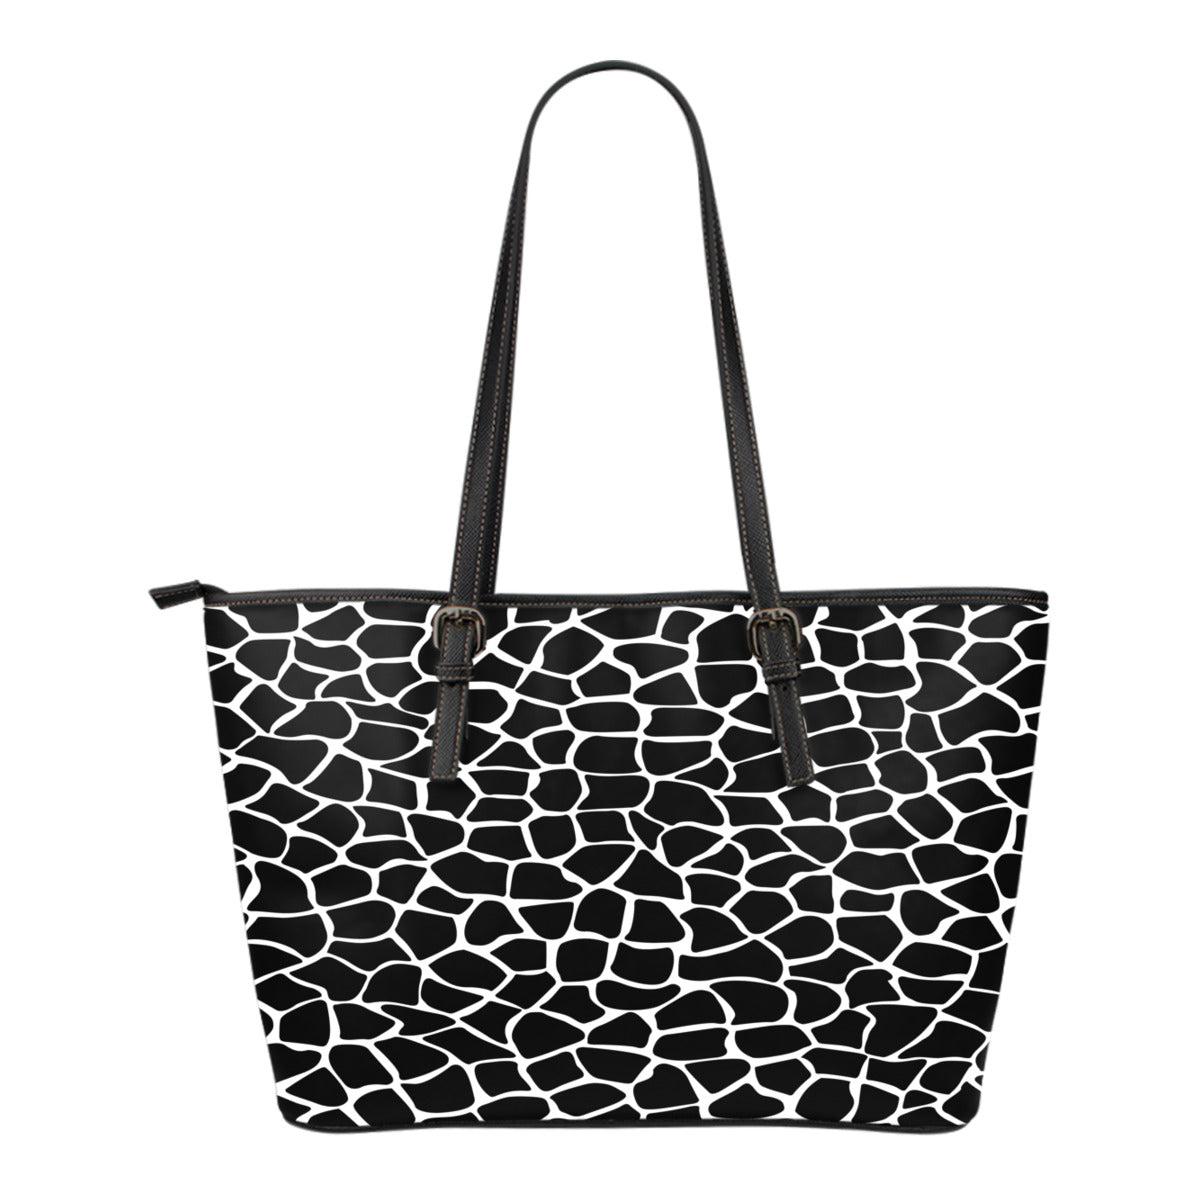 Animal Print BW Themed Design C4 Women Small Leather Tote Bag